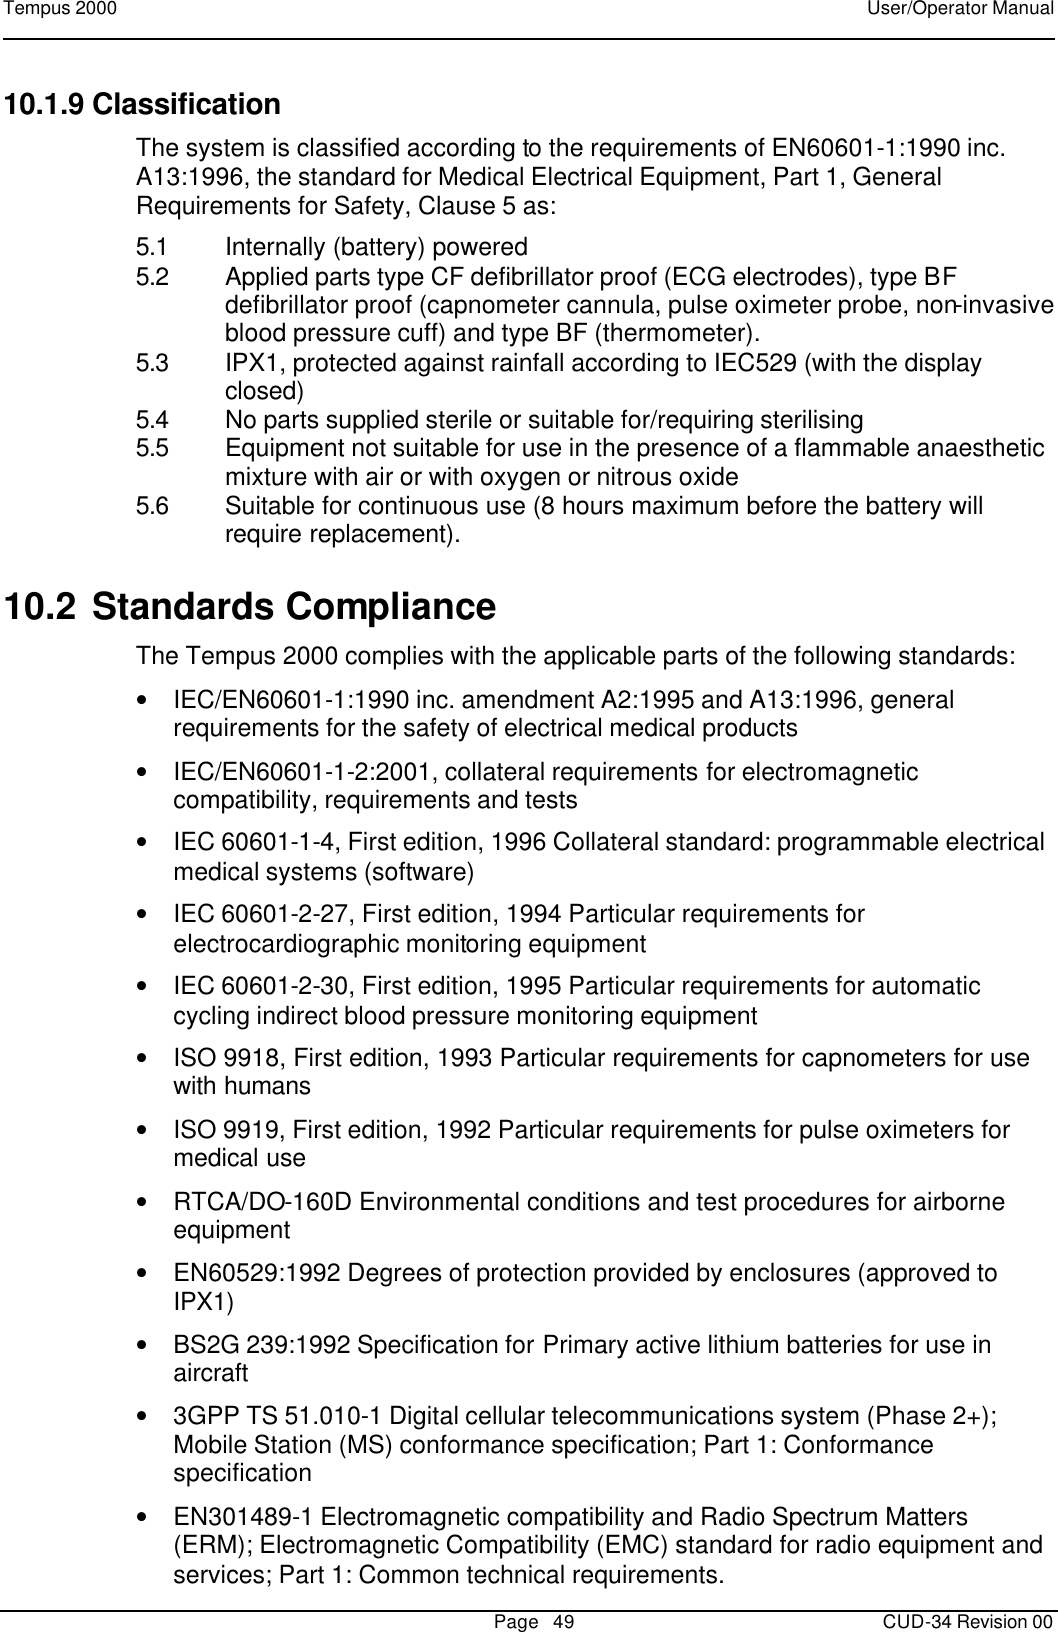 Tempus 2000    User/Operator Manual       Page   49   CUD-34 Revision 00 10.1.9 Classification The system is classified according to the requirements of EN60601-1:1990 inc. A13:1996, the standard for Medical Electrical Equipment, Part 1, General Requirements for Safety, Clause 5 as: 5.1 Internally (battery) powered 5.2 Applied parts type CF defibrillator proof (ECG electrodes), type BF defibrillator proof (capnometer cannula, pulse oximeter probe, non-invasive blood pressure cuff) and type BF (thermometer). 5.3 IPX1, protected against rainfall according to IEC529 (with the display closed) 5.4 No parts supplied sterile or suitable for/requiring sterilising 5.5 Equipment not suitable for use in the presence of a flammable anaesthetic mixture with air or with oxygen or nitrous oxide 5.6 Suitable for continuous use (8 hours maximum before the battery will require replacement). 10.2 Standards Compliance  The Tempus 2000 complies with the applicable parts of the following standards: • IEC/EN60601-1:1990 inc. amendment A2:1995 and A13:1996, general requirements for the safety of electrical medical products • IEC/EN60601-1-2:2001, collateral requirements for electromagnetic compatibility, requirements and tests • IEC 60601-1-4, First edition, 1996 Collateral standard: programmable electrical medical systems (software) • IEC 60601-2-27, First edition, 1994 Particular requirements for electrocardiographic monitoring equipment • IEC 60601-2-30, First edition, 1995 Particular requirements for automatic cycling indirect blood pressure monitoring equipment • ISO 9918, First edition, 1993 Particular requirements for capnometers for use with humans • ISO 9919, First edition, 1992 Particular requirements for pulse oximeters for medical use • RTCA/DO-160D Environmental conditions and test procedures for airborne equipment • EN60529:1992 Degrees of protection provided by enclosures (approved to IPX1) • BS2G 239:1992 Specification for Primary active lithium batteries for use in aircraft • 3GPP TS 51.010-1 Digital cellular telecommunications system (Phase 2+); Mobile Station (MS) conformance specification; Part 1: Conformance specification • EN301489-1 Electromagnetic compatibility and Radio Spectrum Matters (ERM); Electromagnetic Compatibility (EMC) standard for radio equipment and services; Part 1: Common technical requirements. 